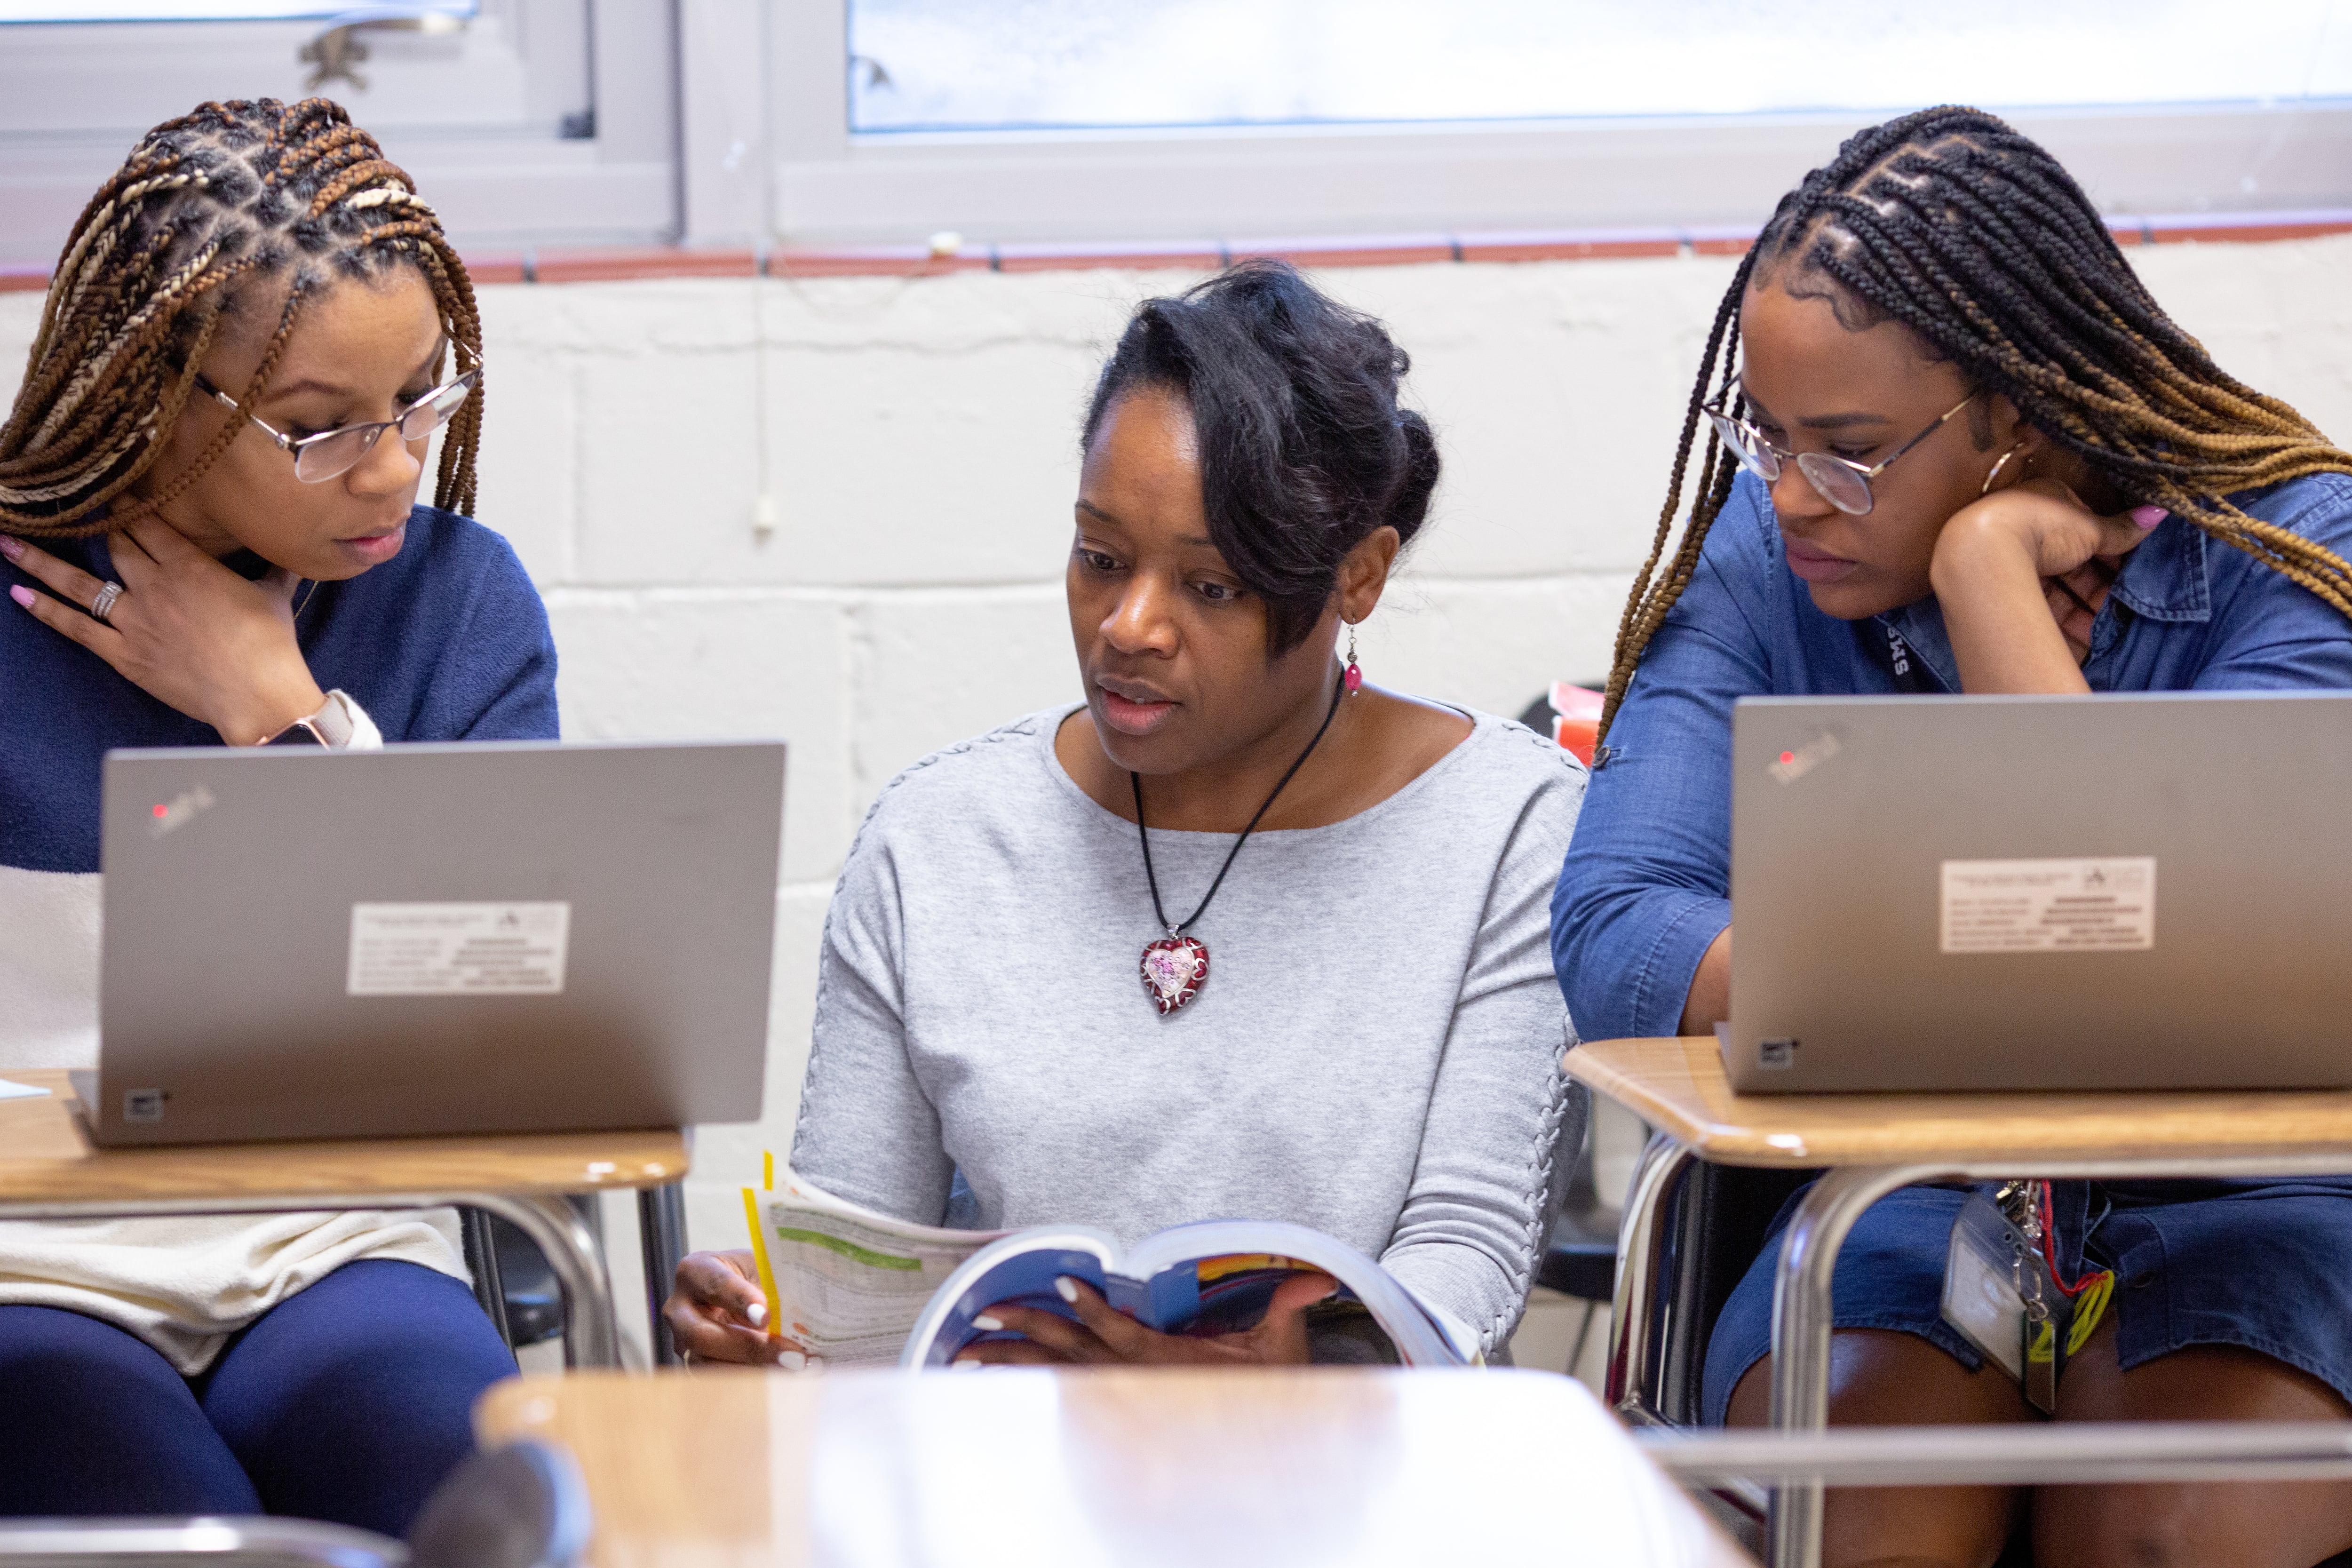 Two young women sit at desks in a classroom with laptops open, looking to a teacher who sits between them going through a textbook.